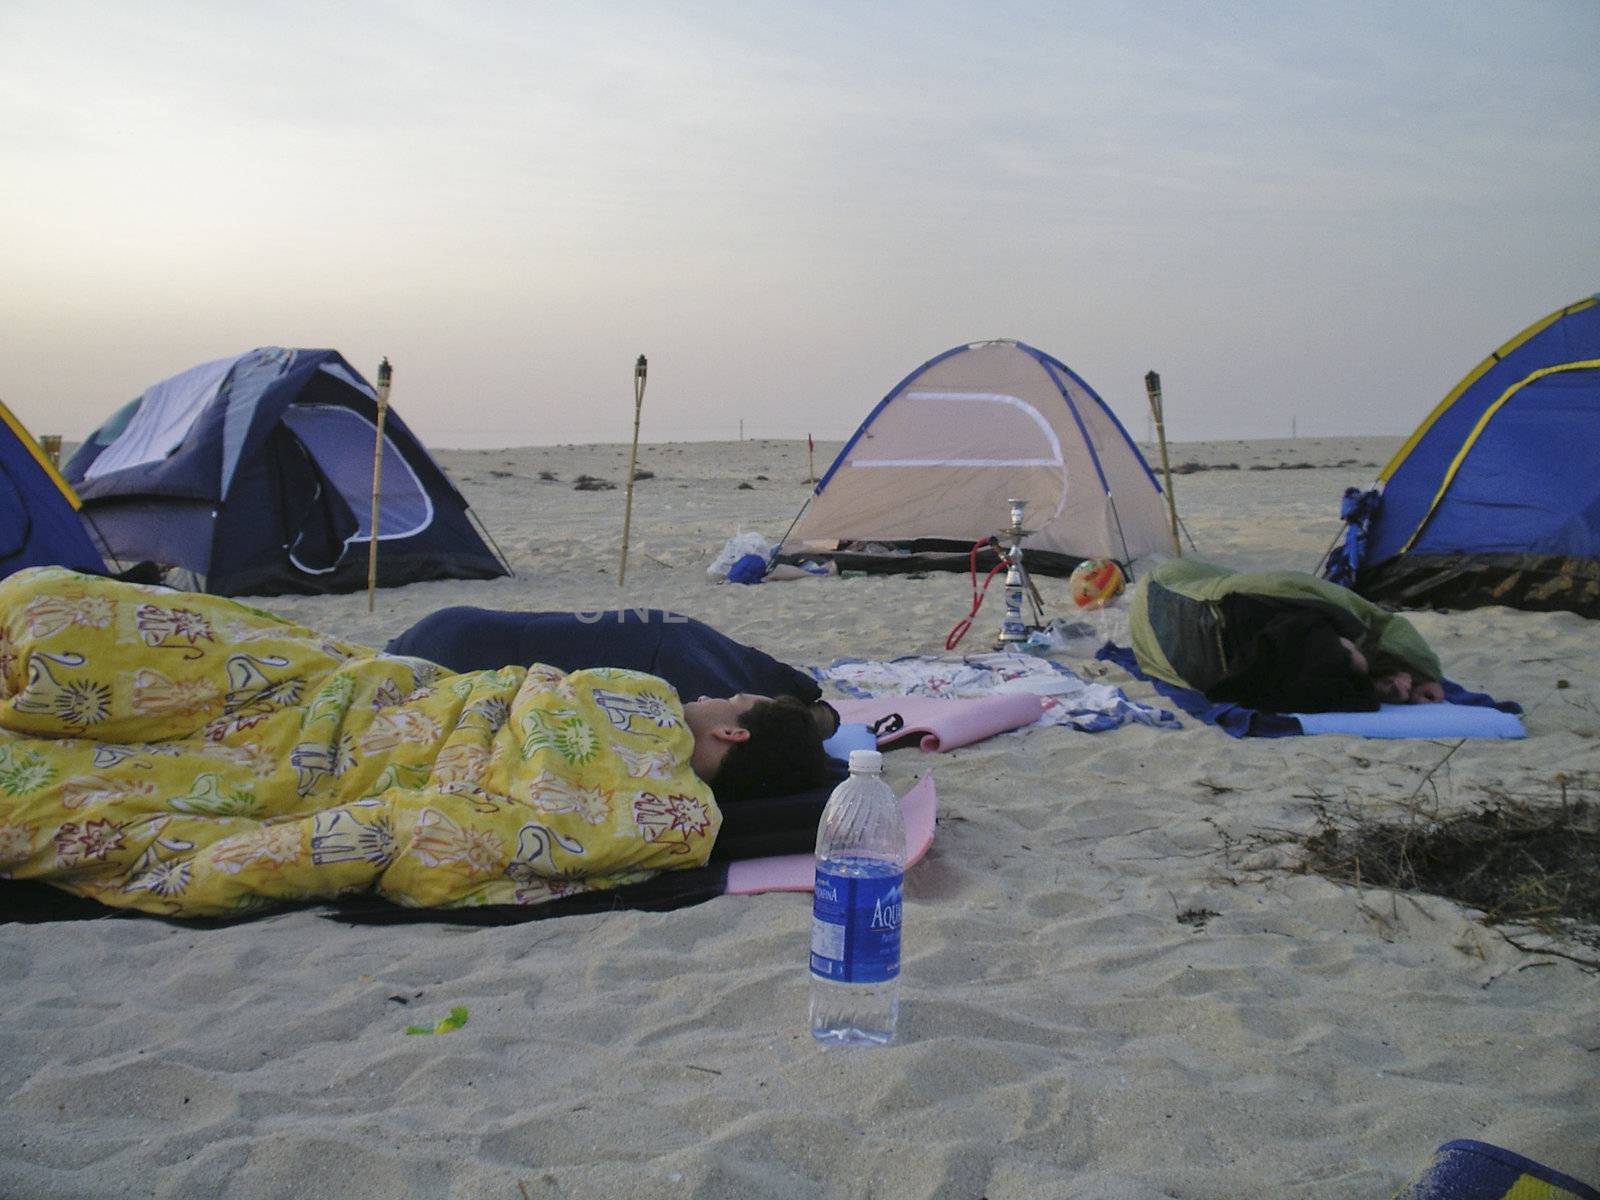 Camping on the beach for Eid in Dubai at Jebel Ali Free Zone